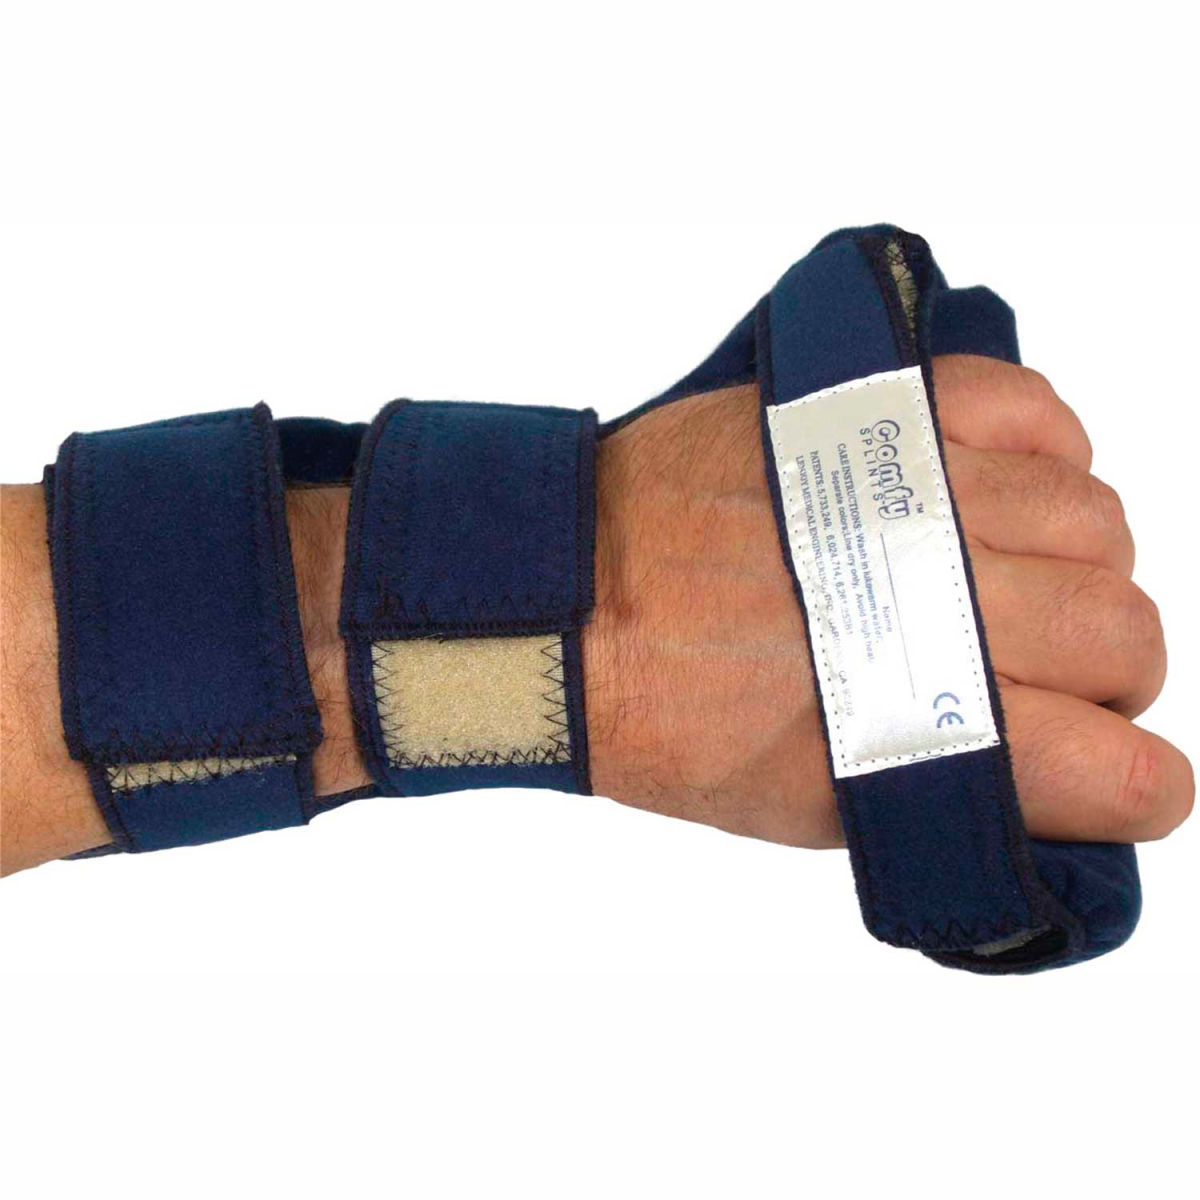 B2196750 Adult Small, Right Comfy Splints Comfy C-Grip Hand Orthosis with 1 Cover & 2 Soft Rolls -  Fabrication Enterprises